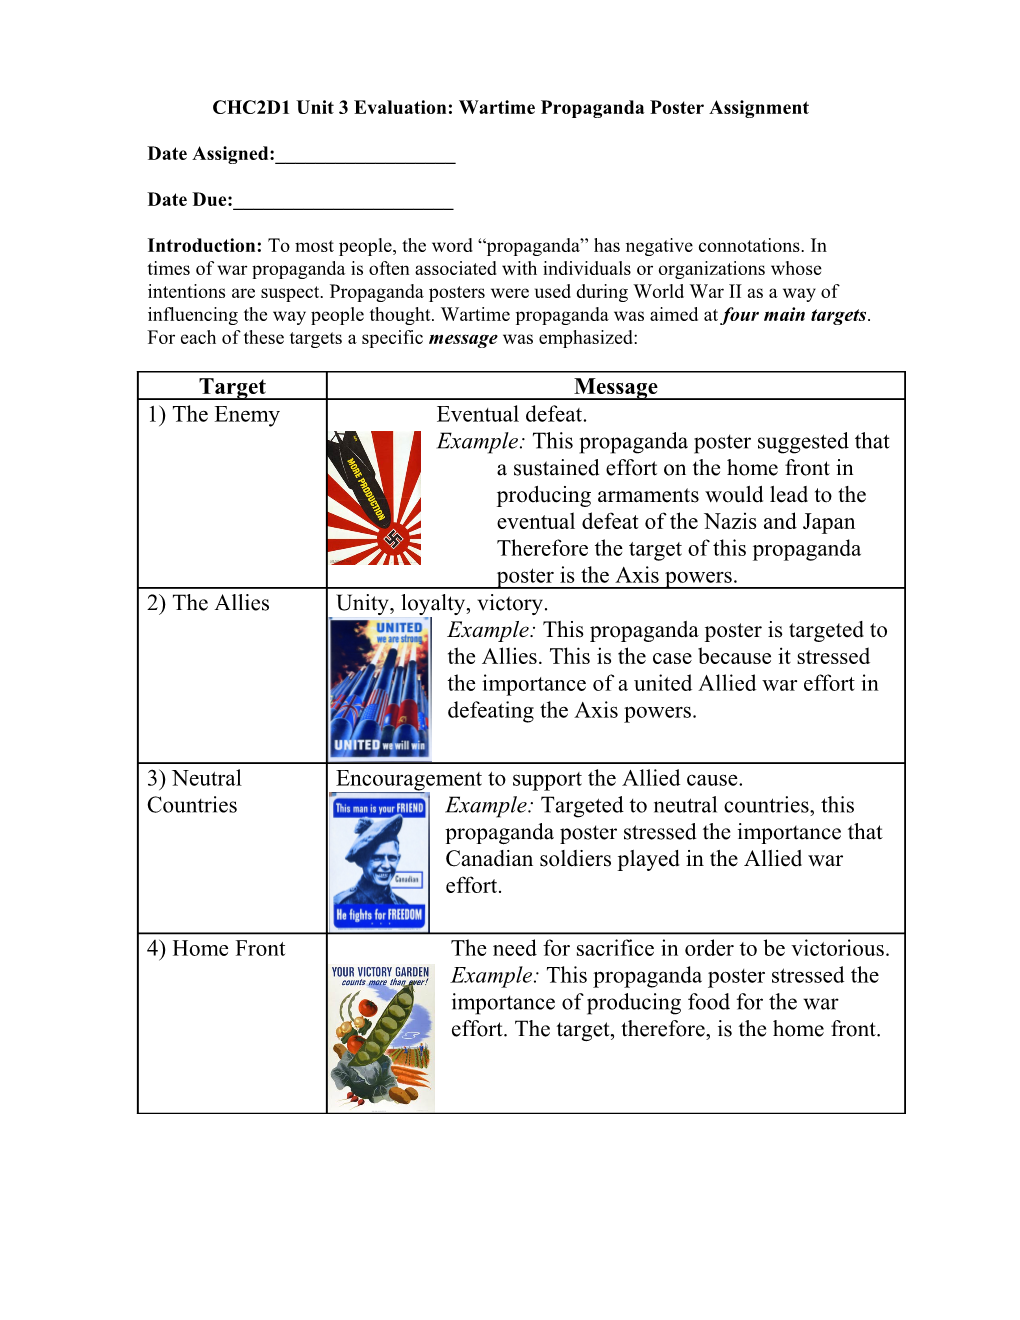 CHC2D1 Unit 3 Evaluation: Wartime Propaganda Poster Assignment